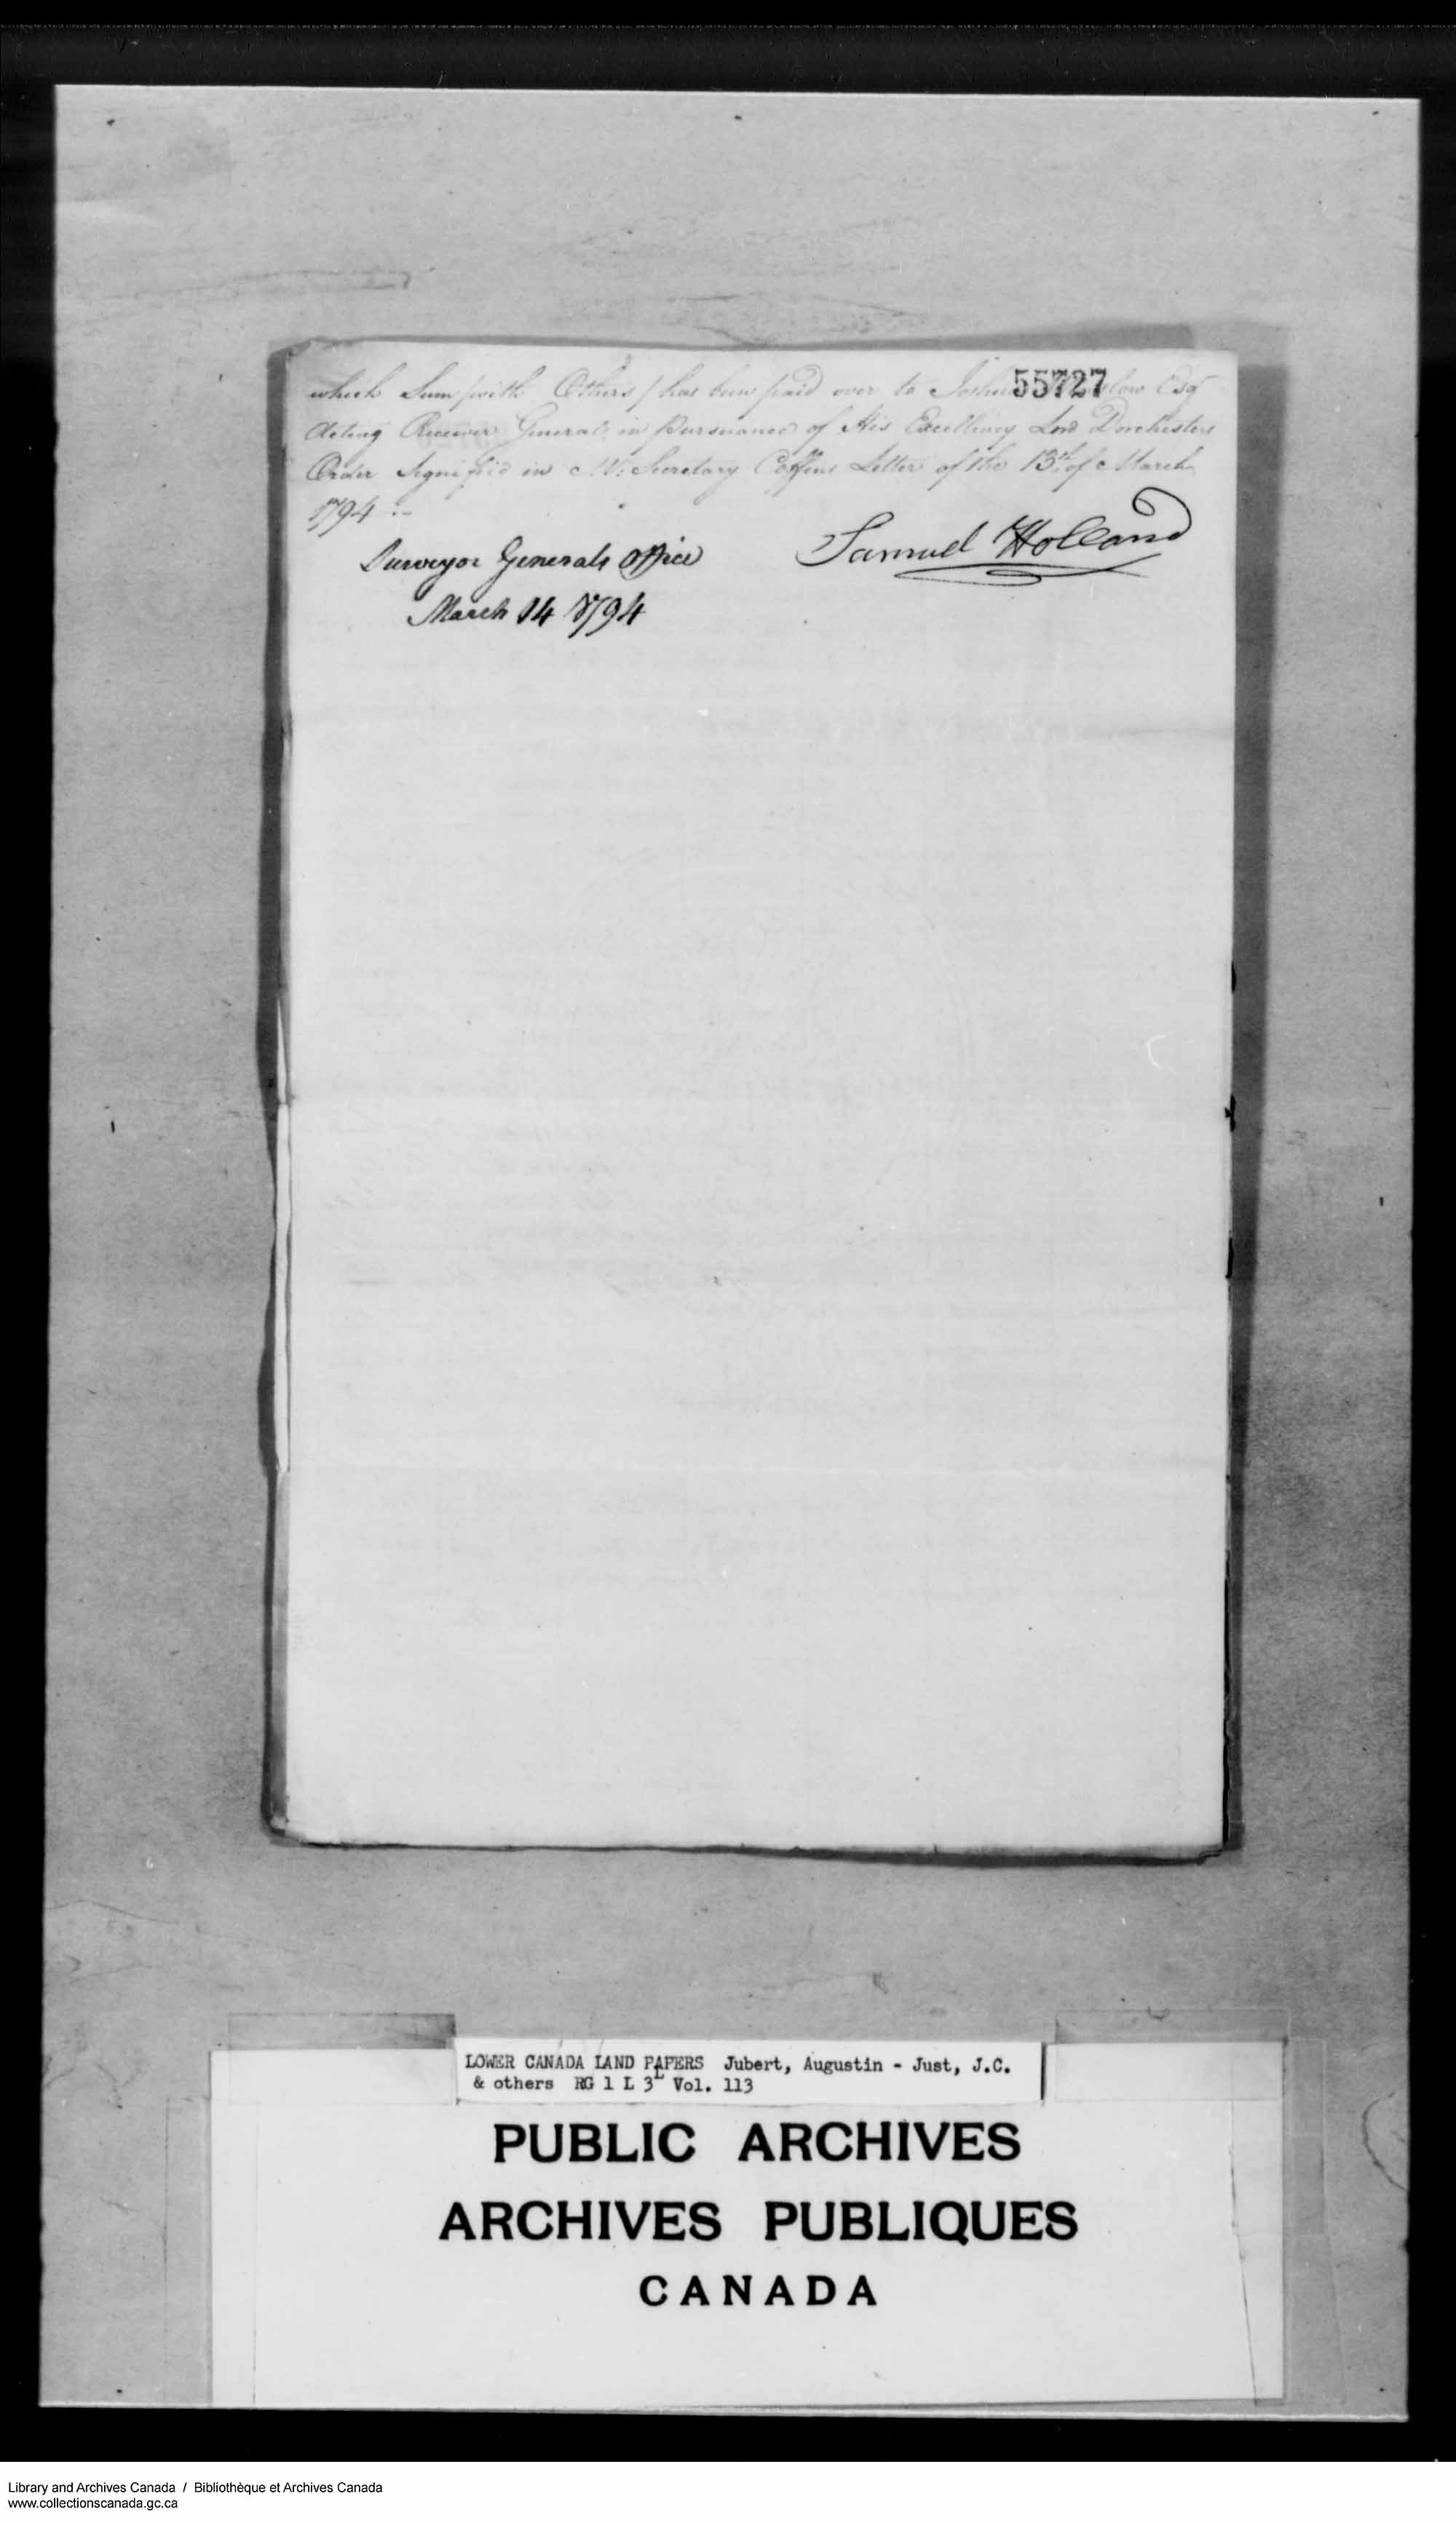 Digitized page of  for Image No.: e008700215